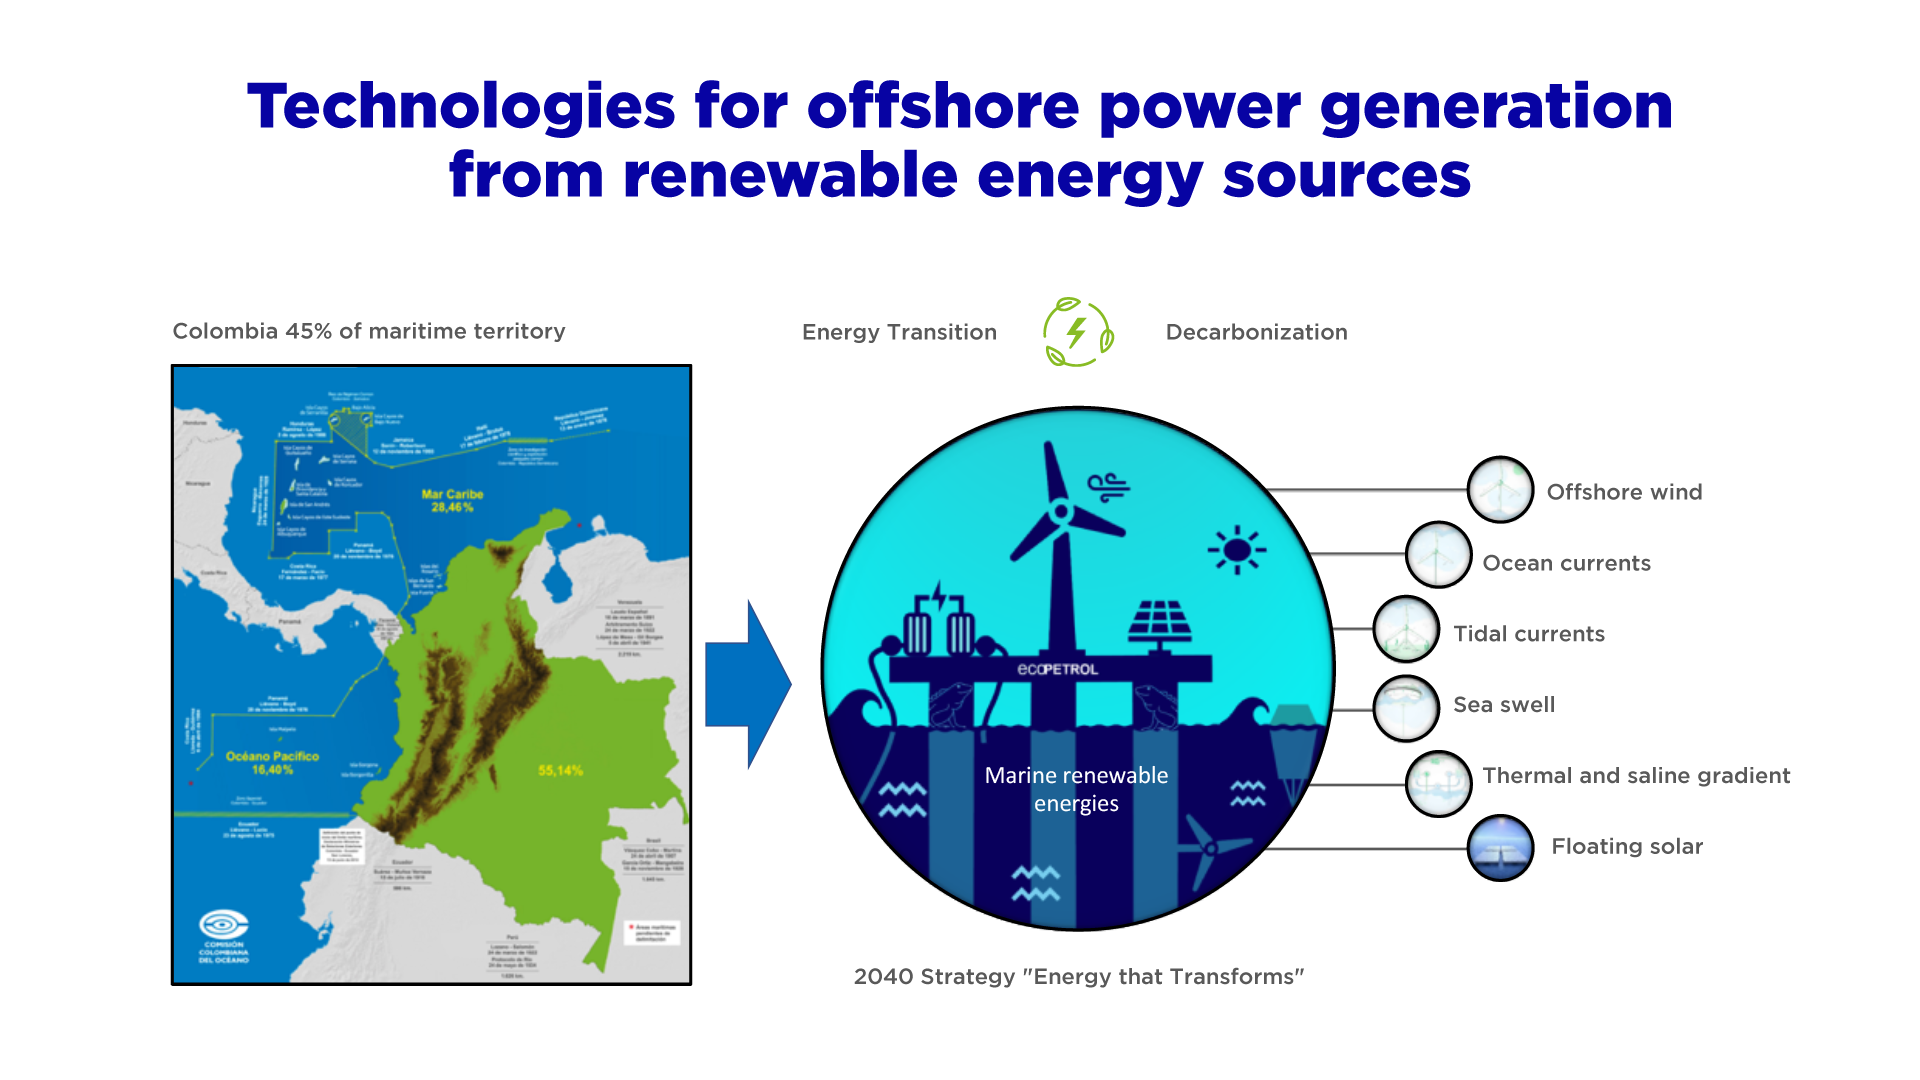 Technologies for offshore power generation from renewable energy sources